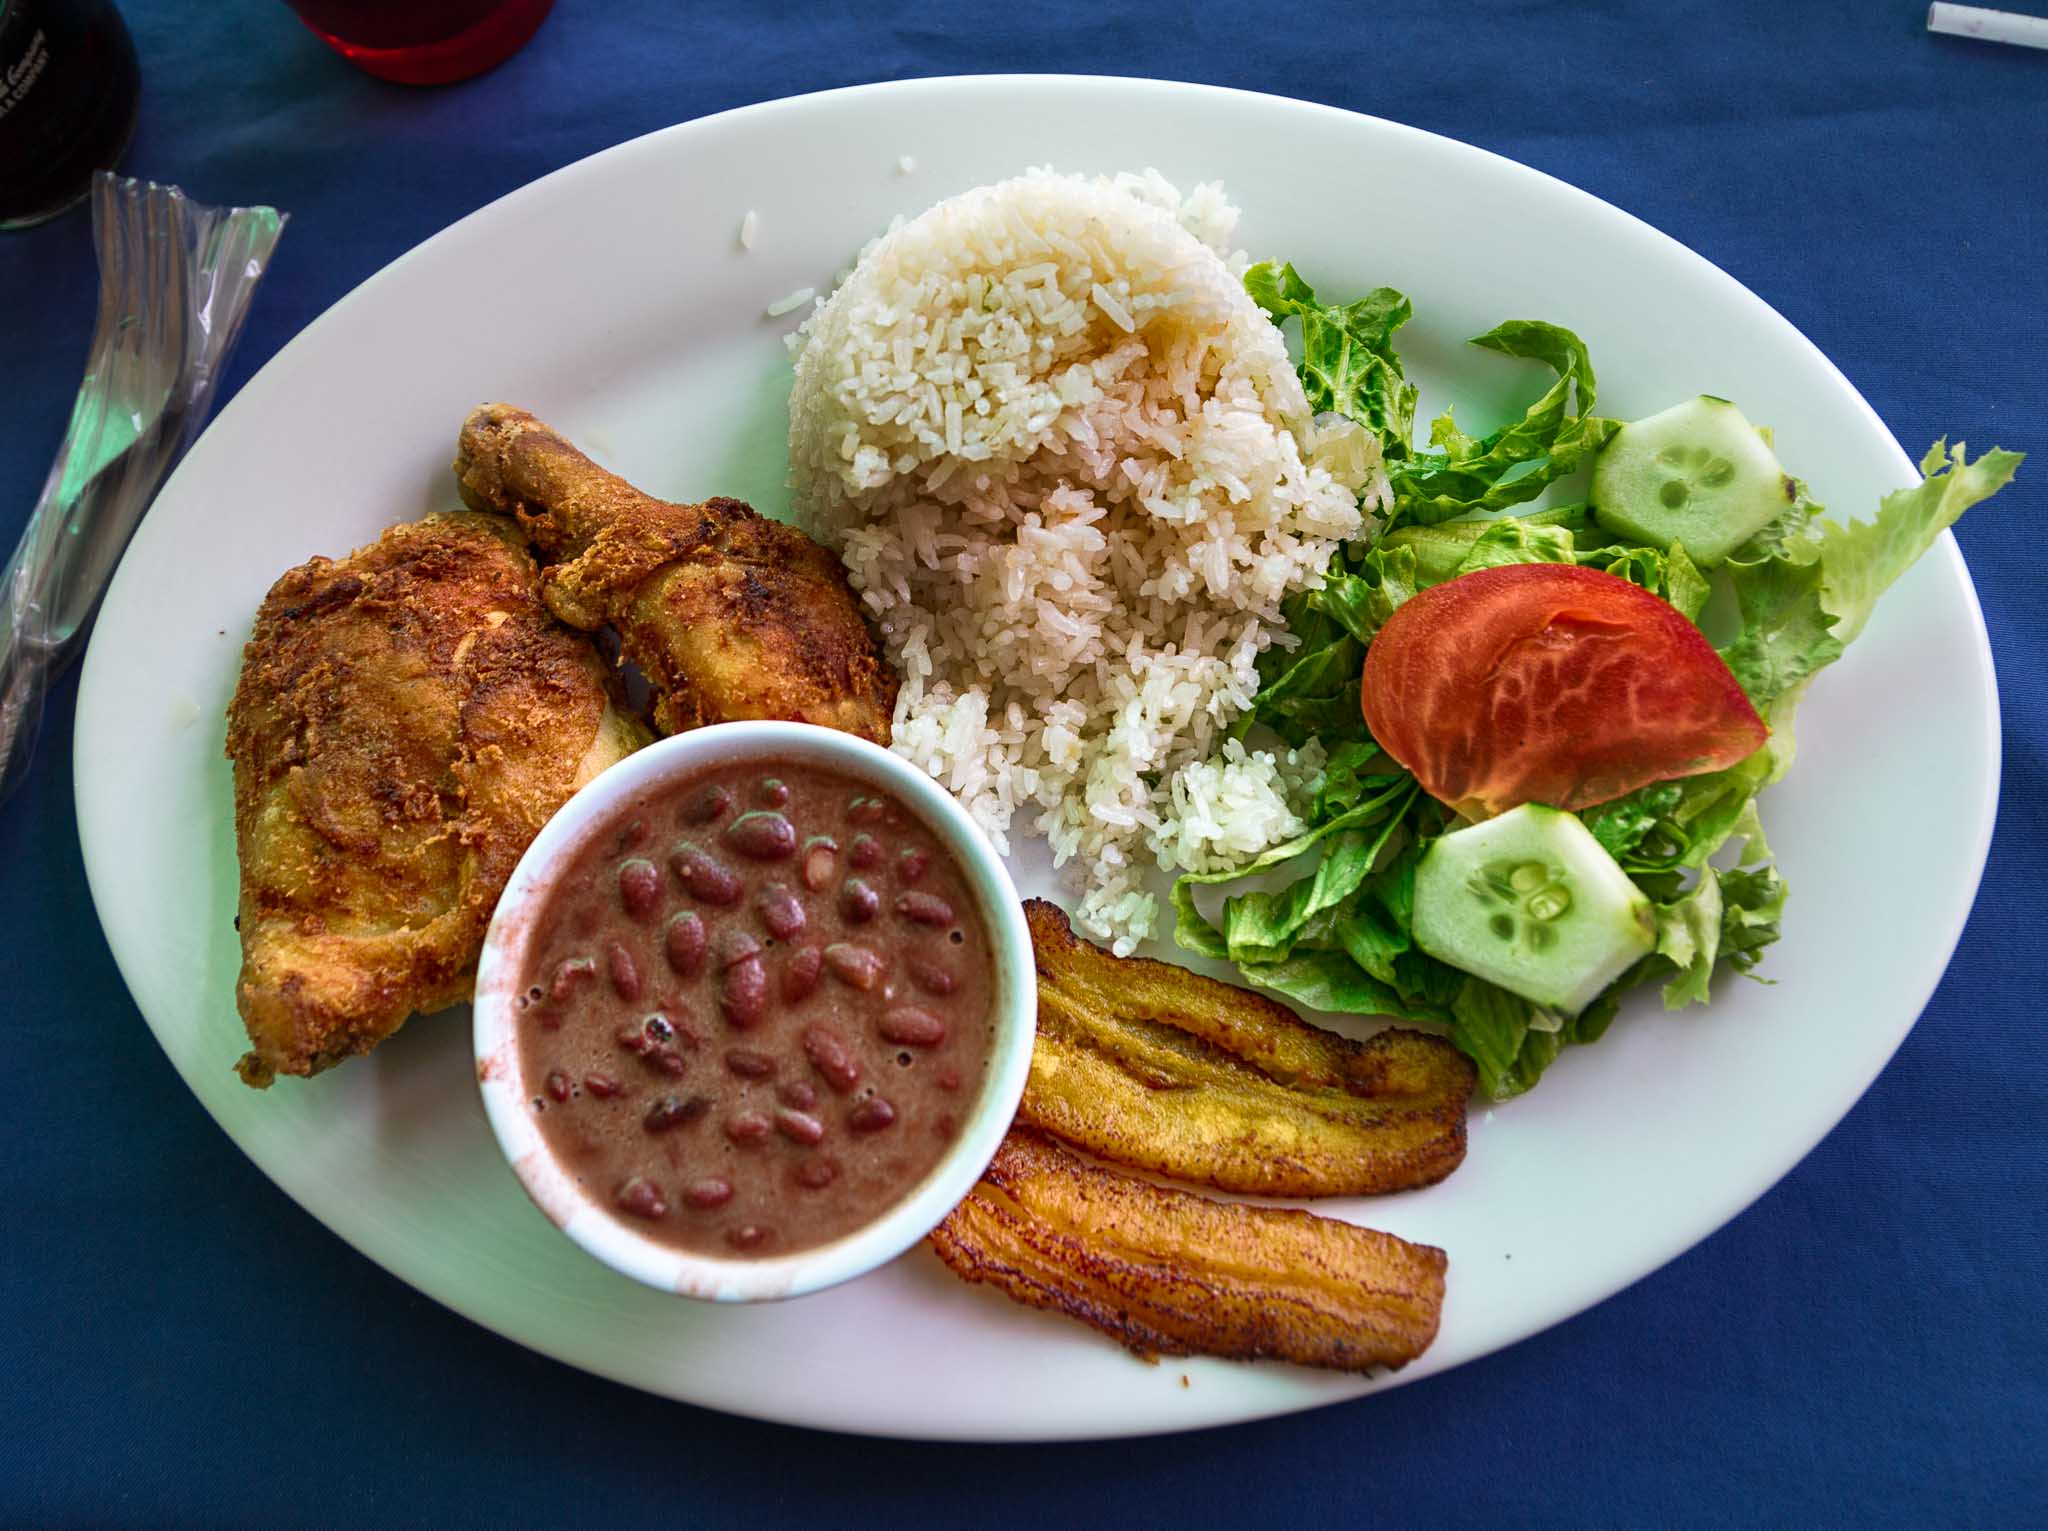 Costa Rican Meal by the Sea – Happier Than A Billionaire